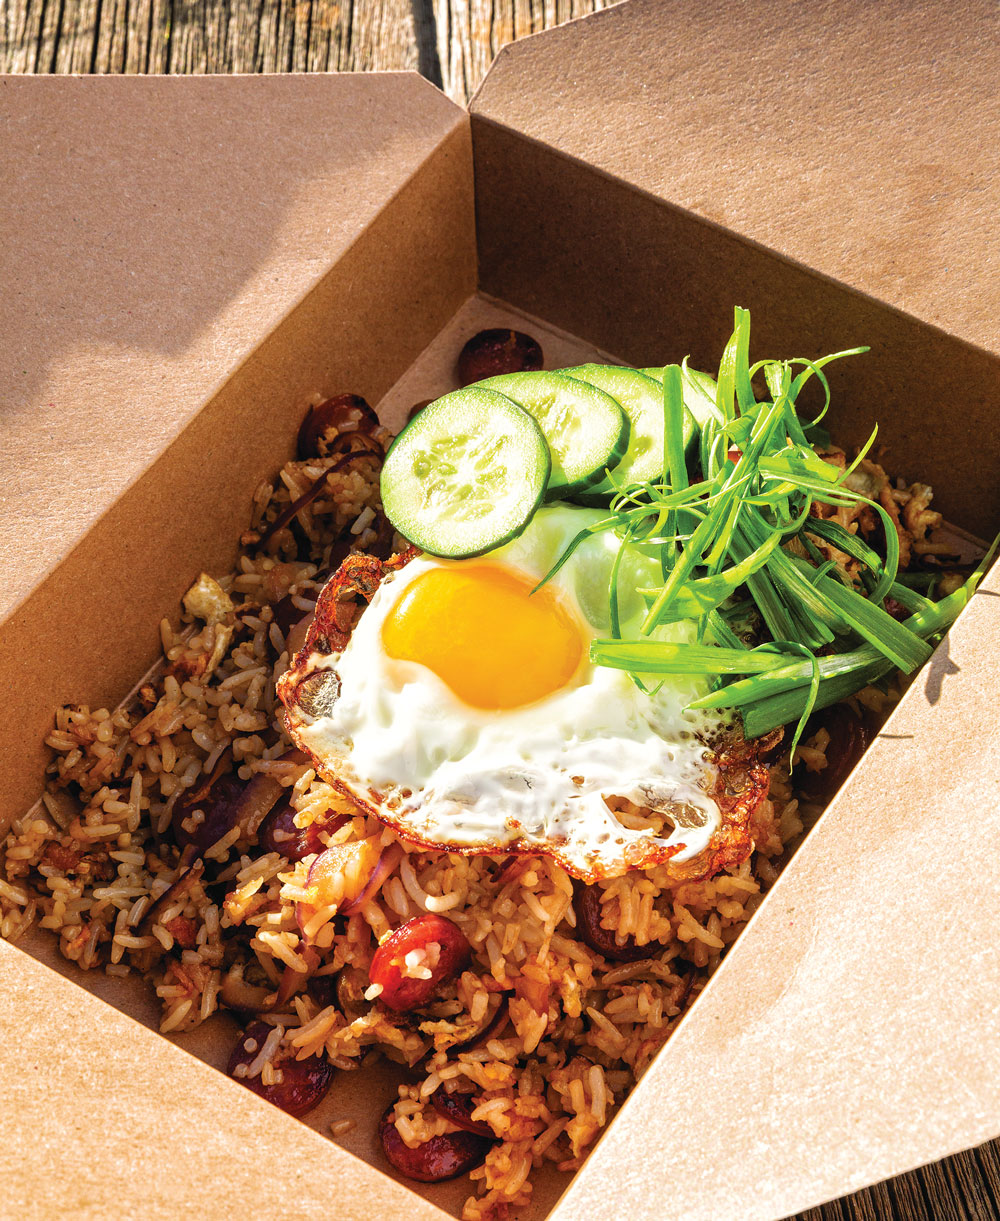 Sunny-topped fried rice with sweet and savory Chinese sausage from Mu Noi Brunch